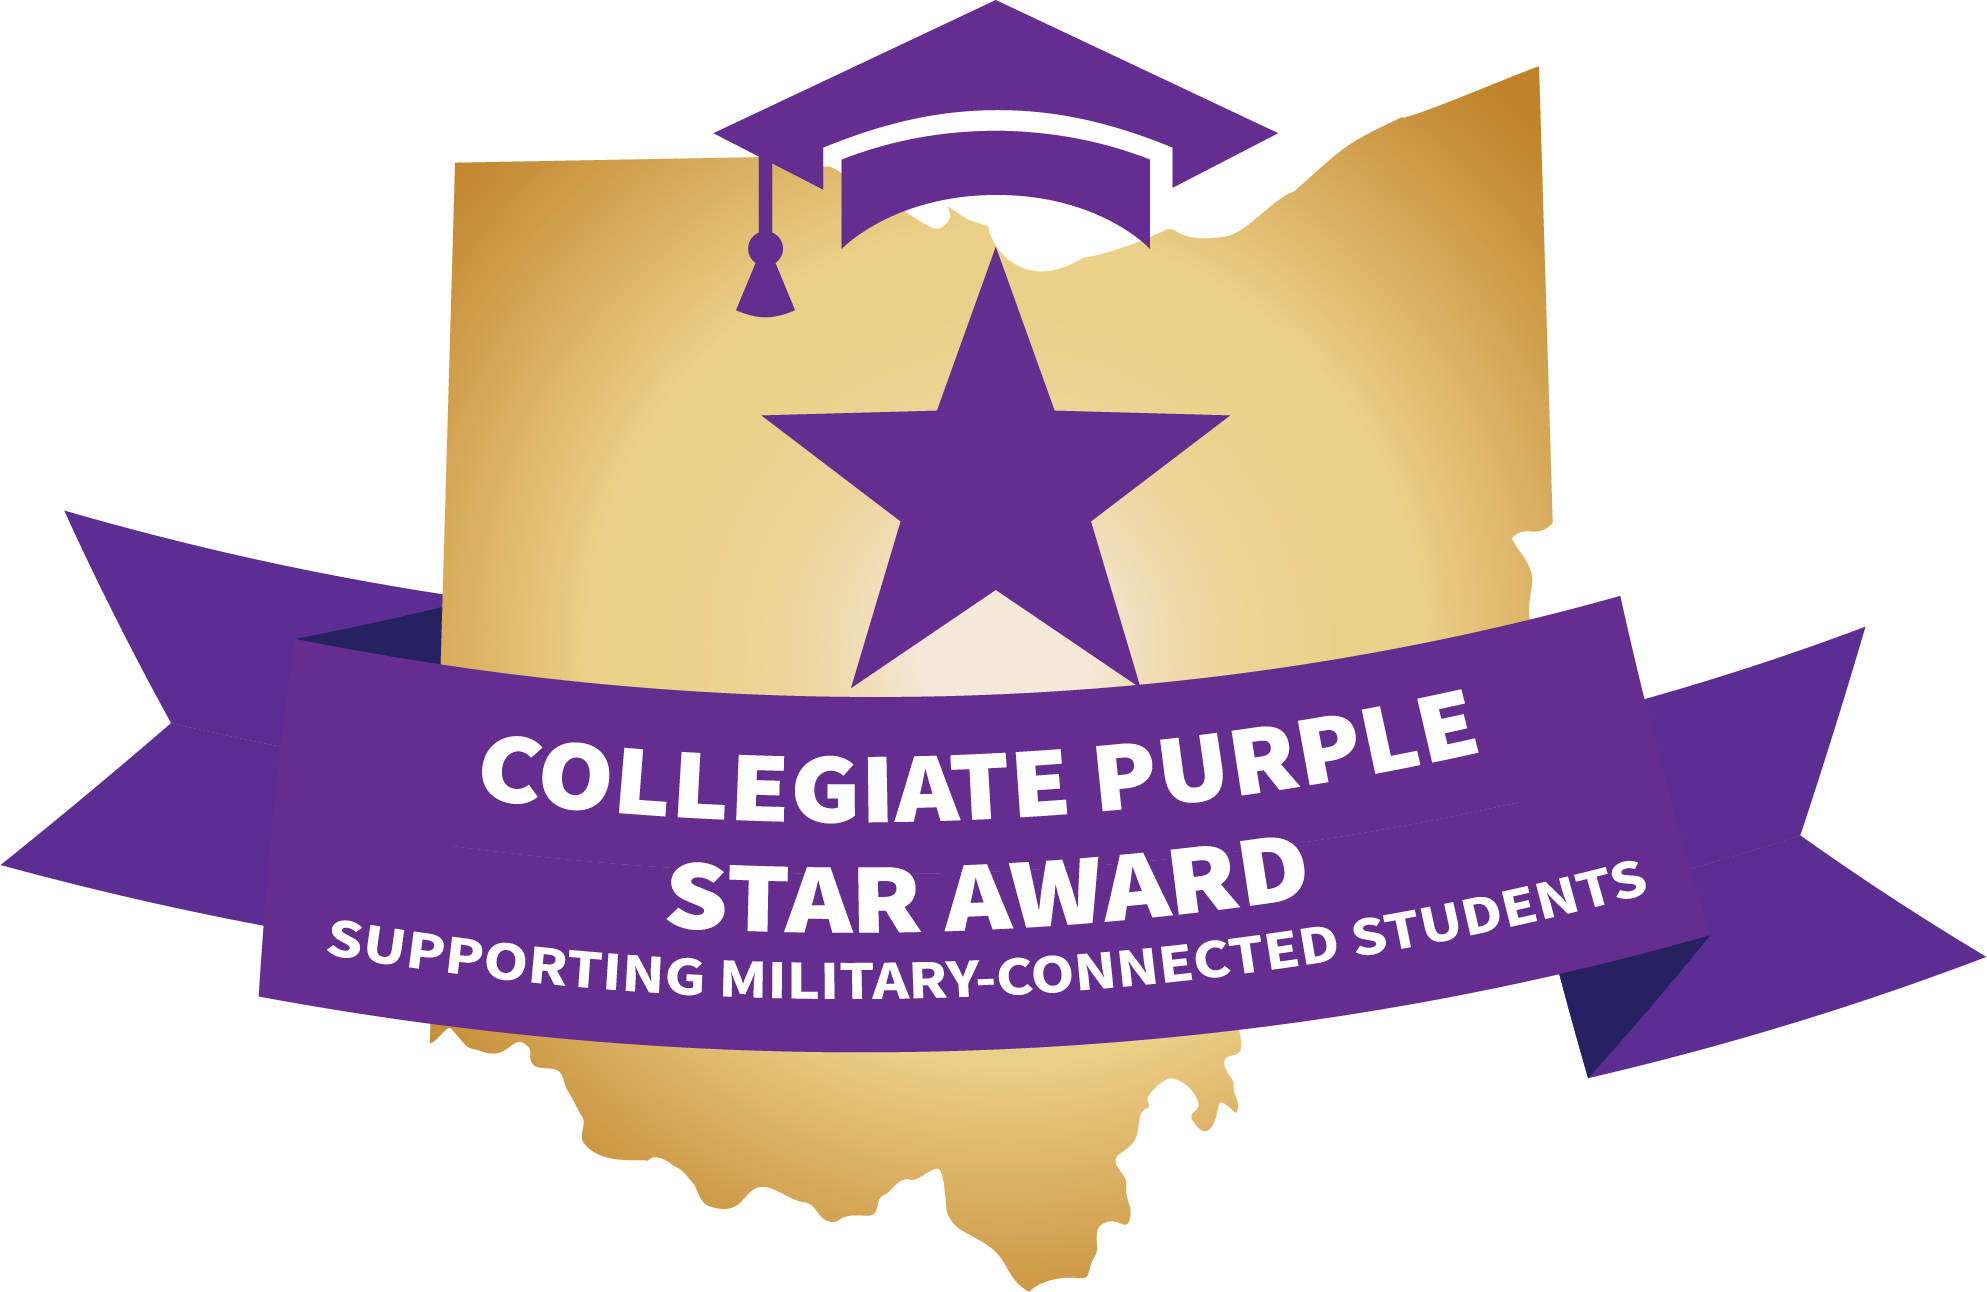 Collegiate Purple Star Award supporting military connected students